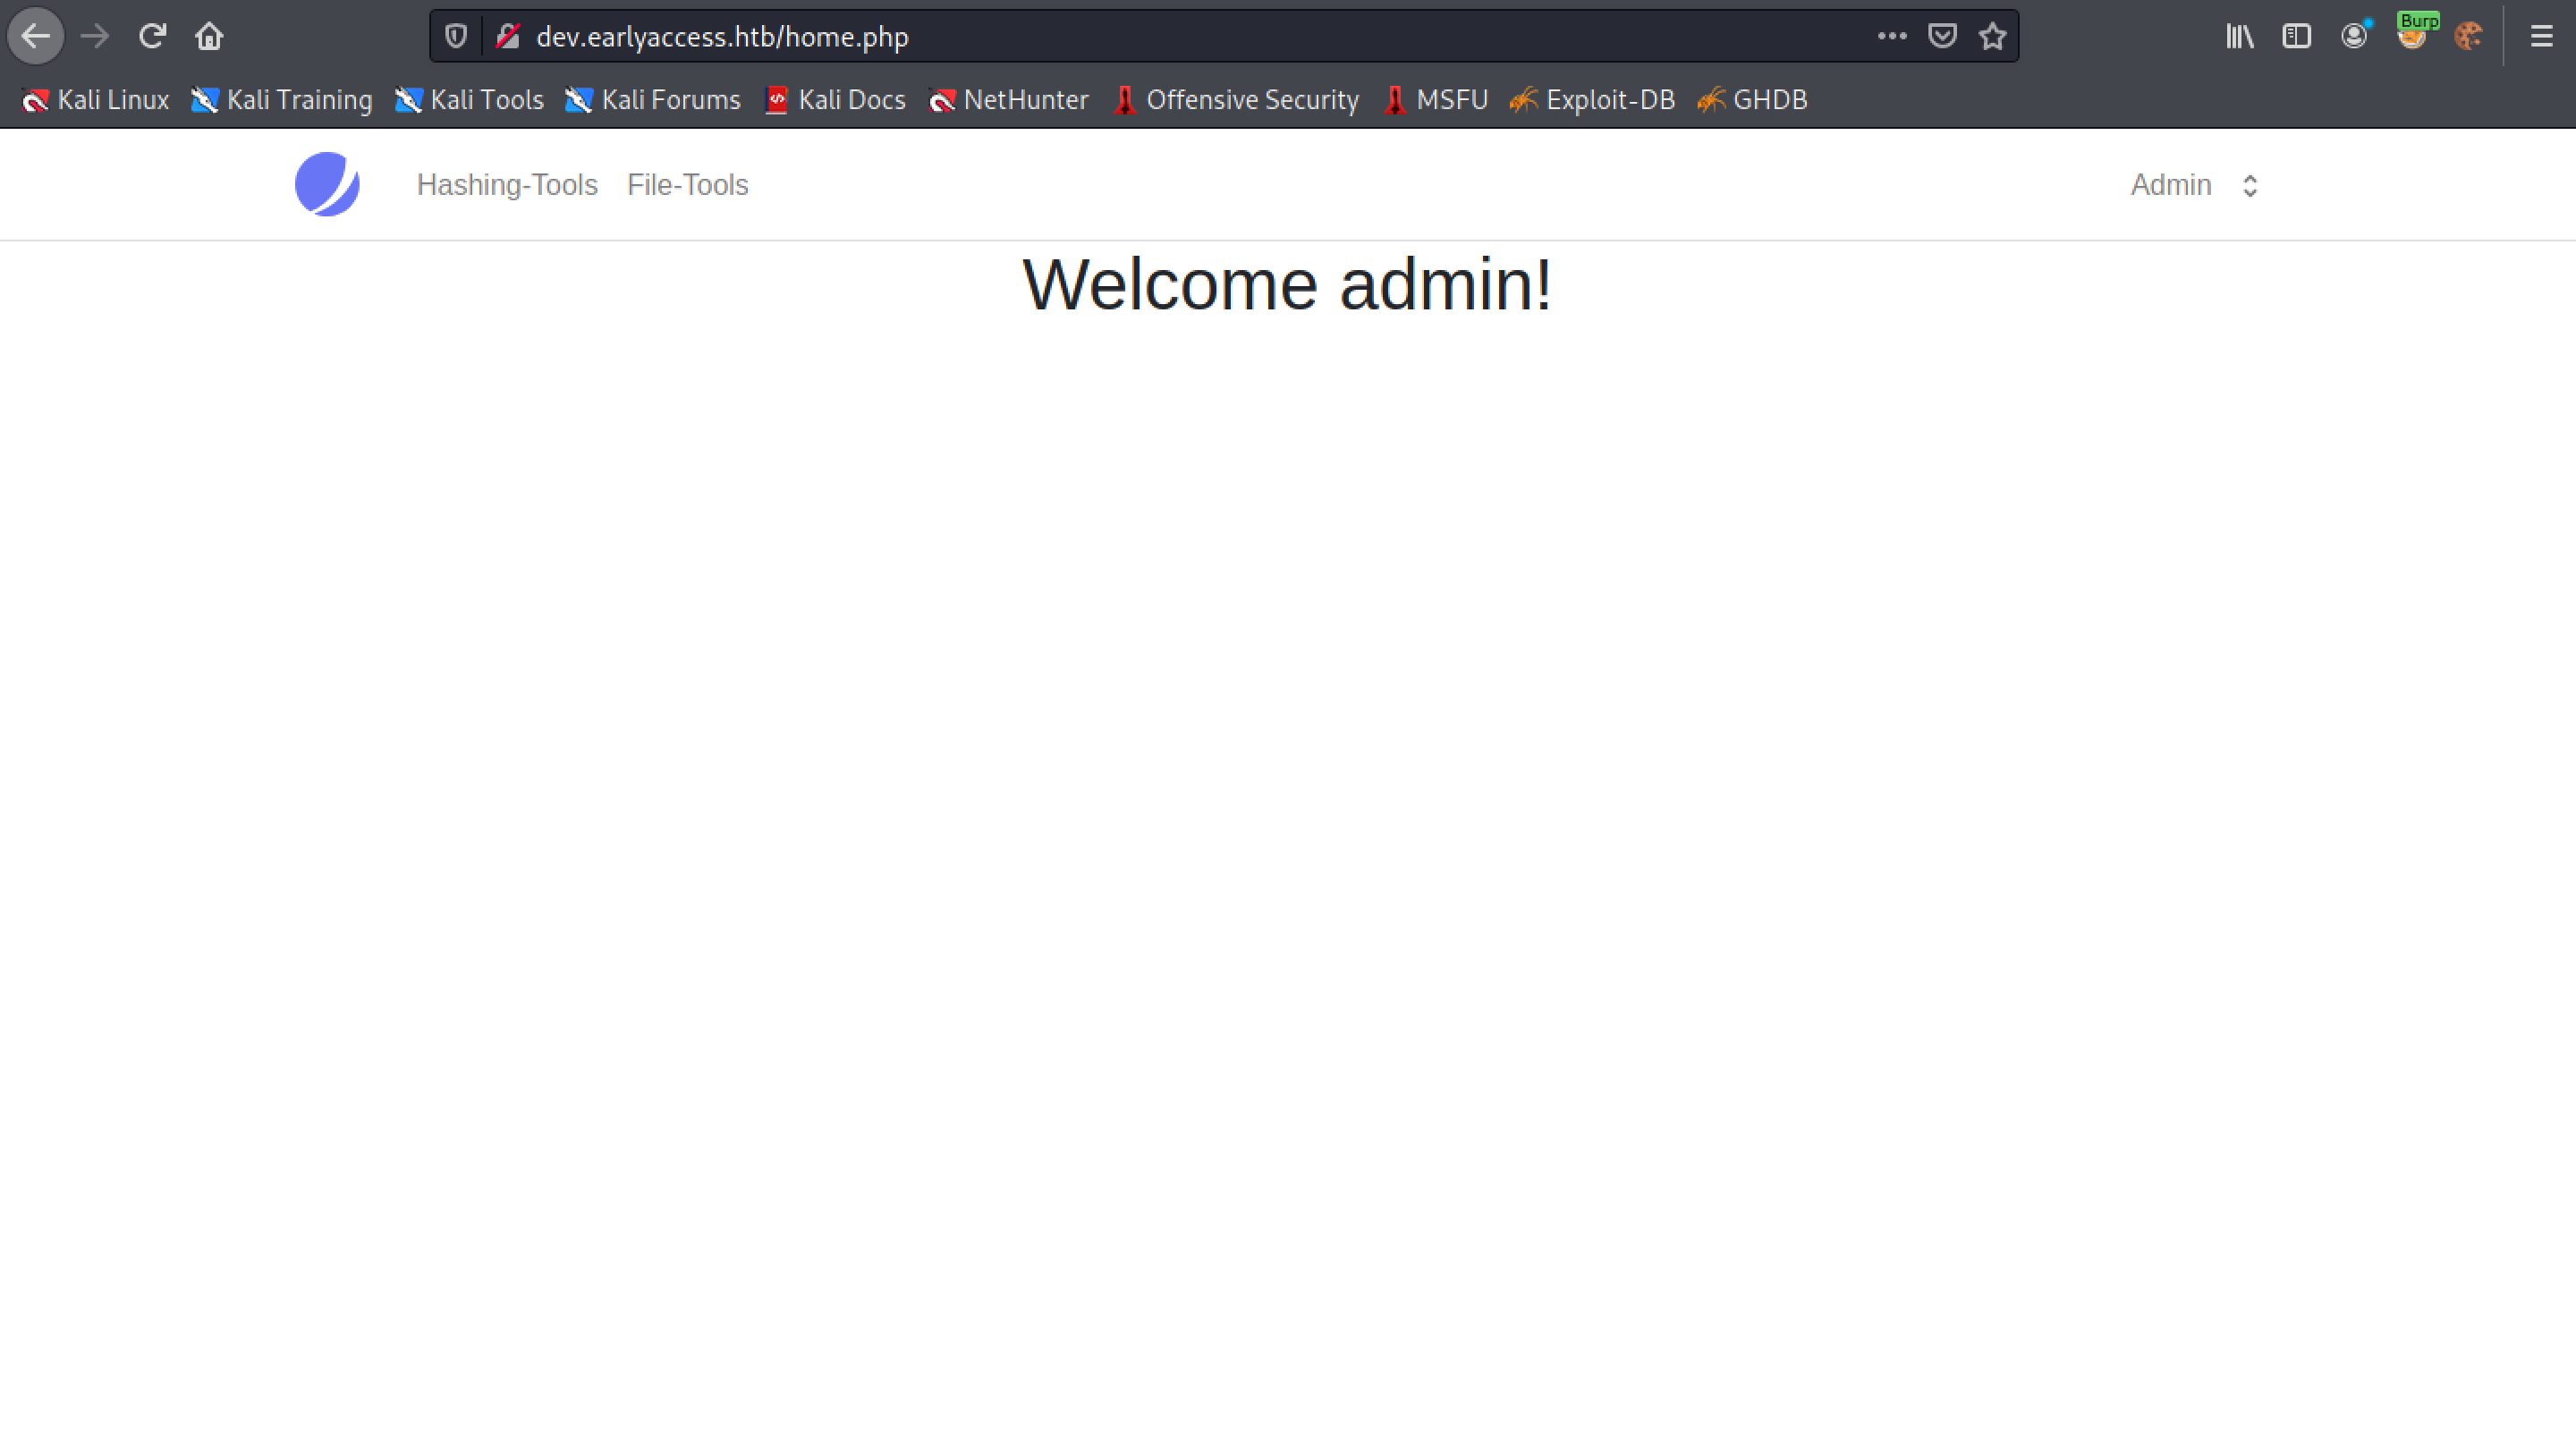 Redirected to the home page for the admin user.